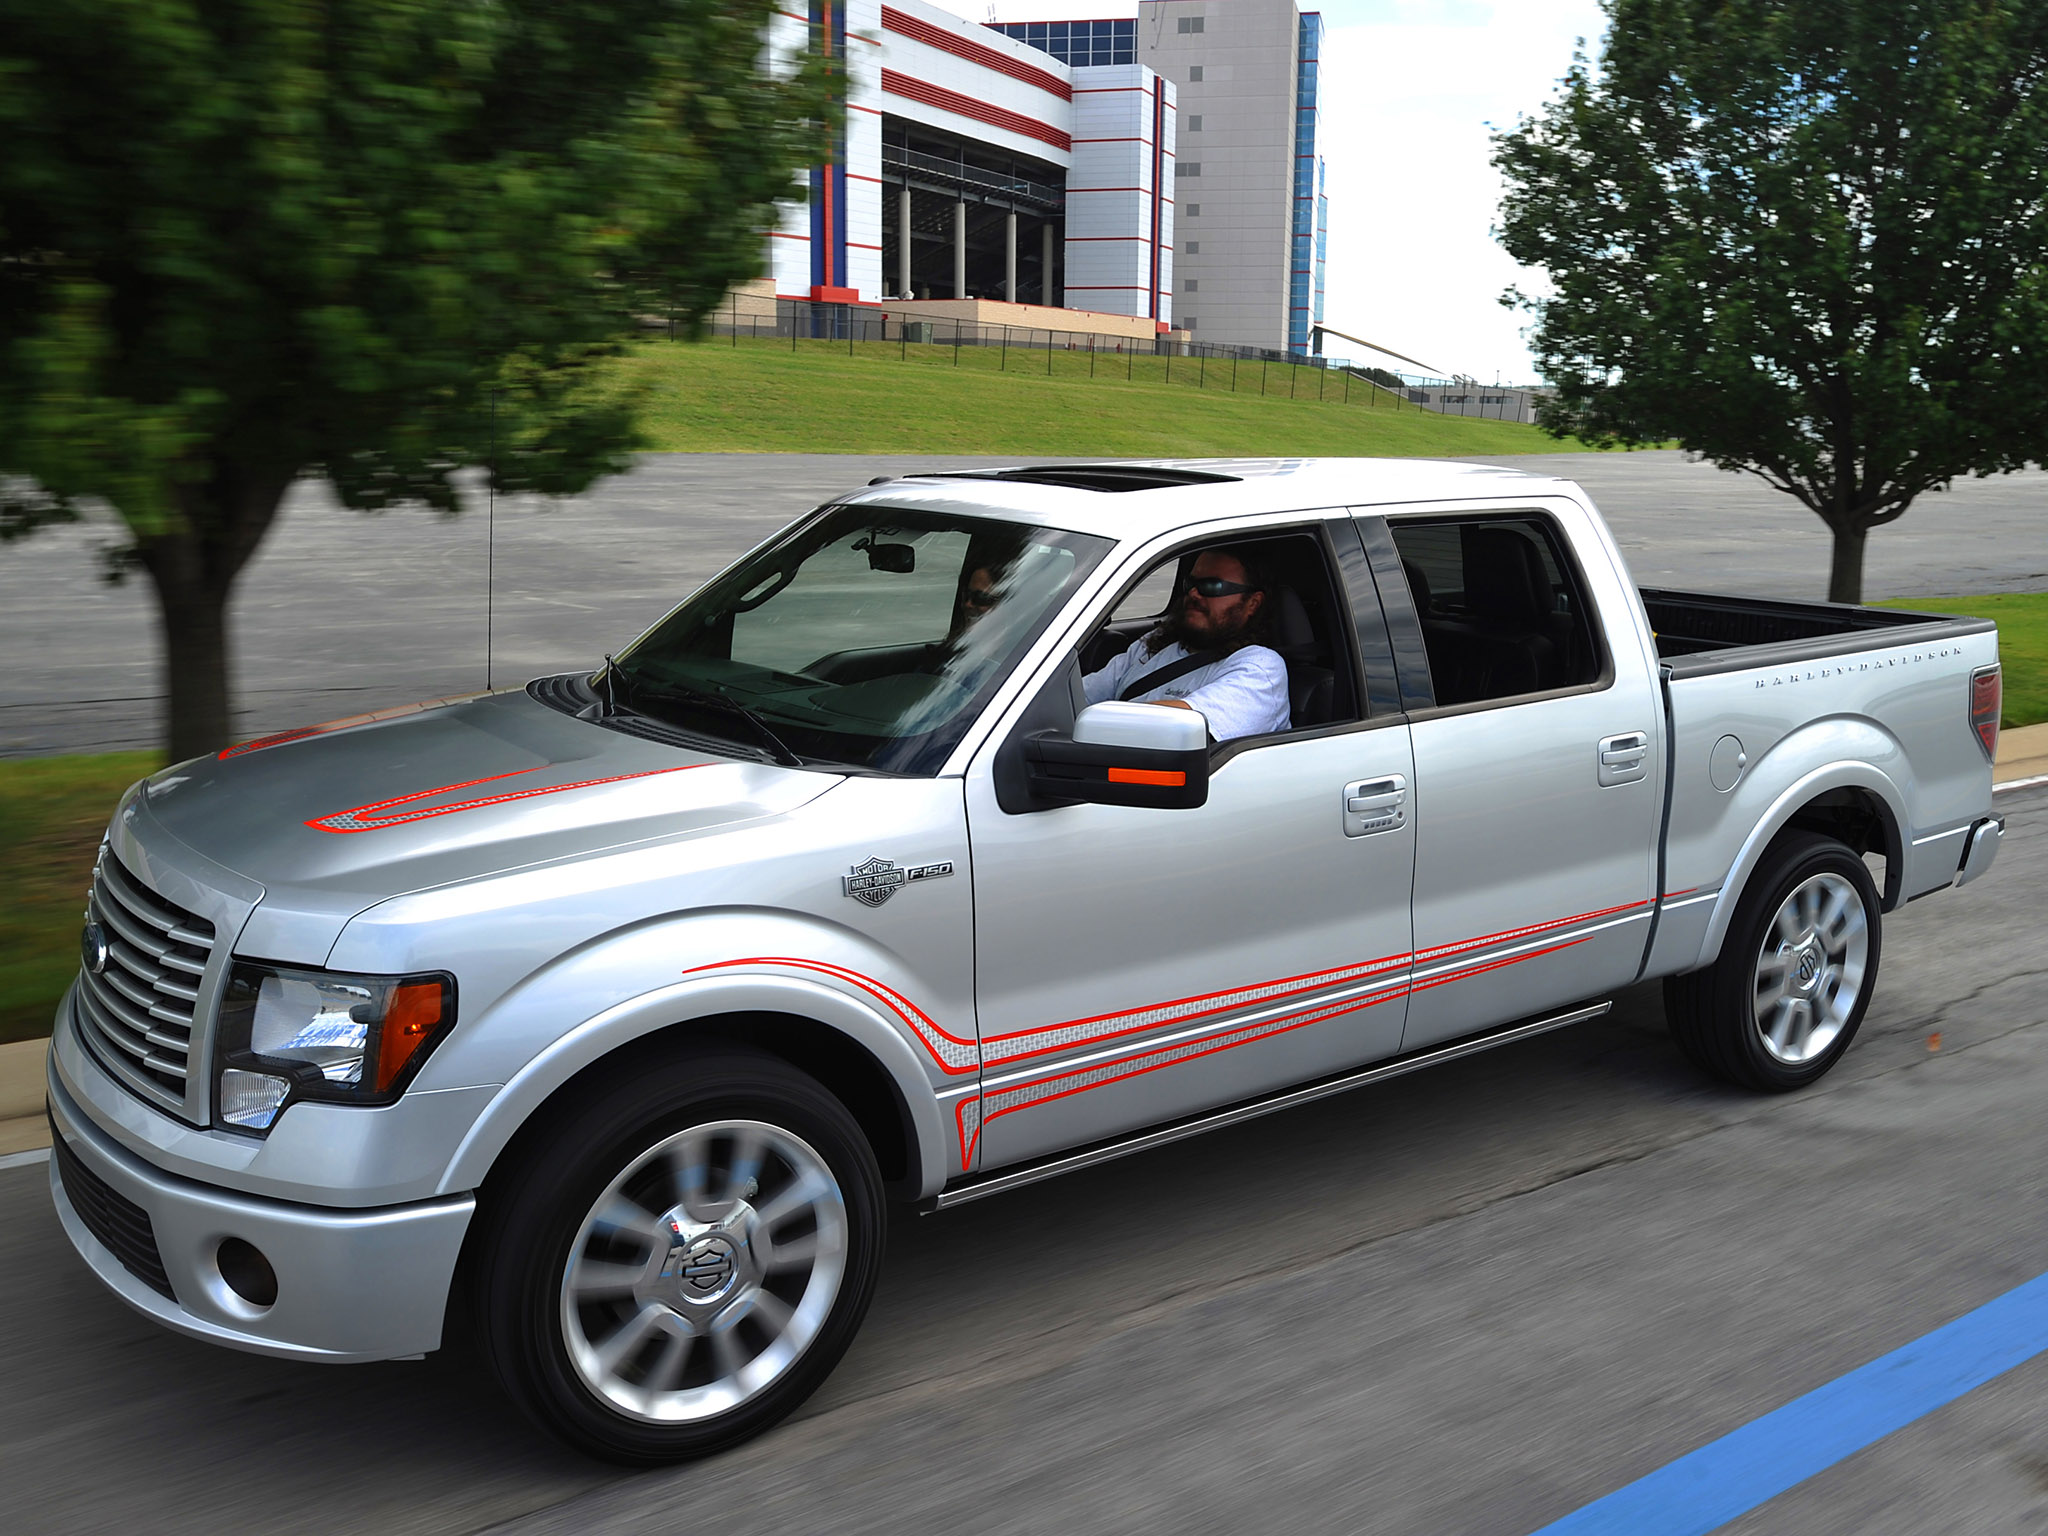 2012 Ford Harley Davidson F 150 Wallpapers